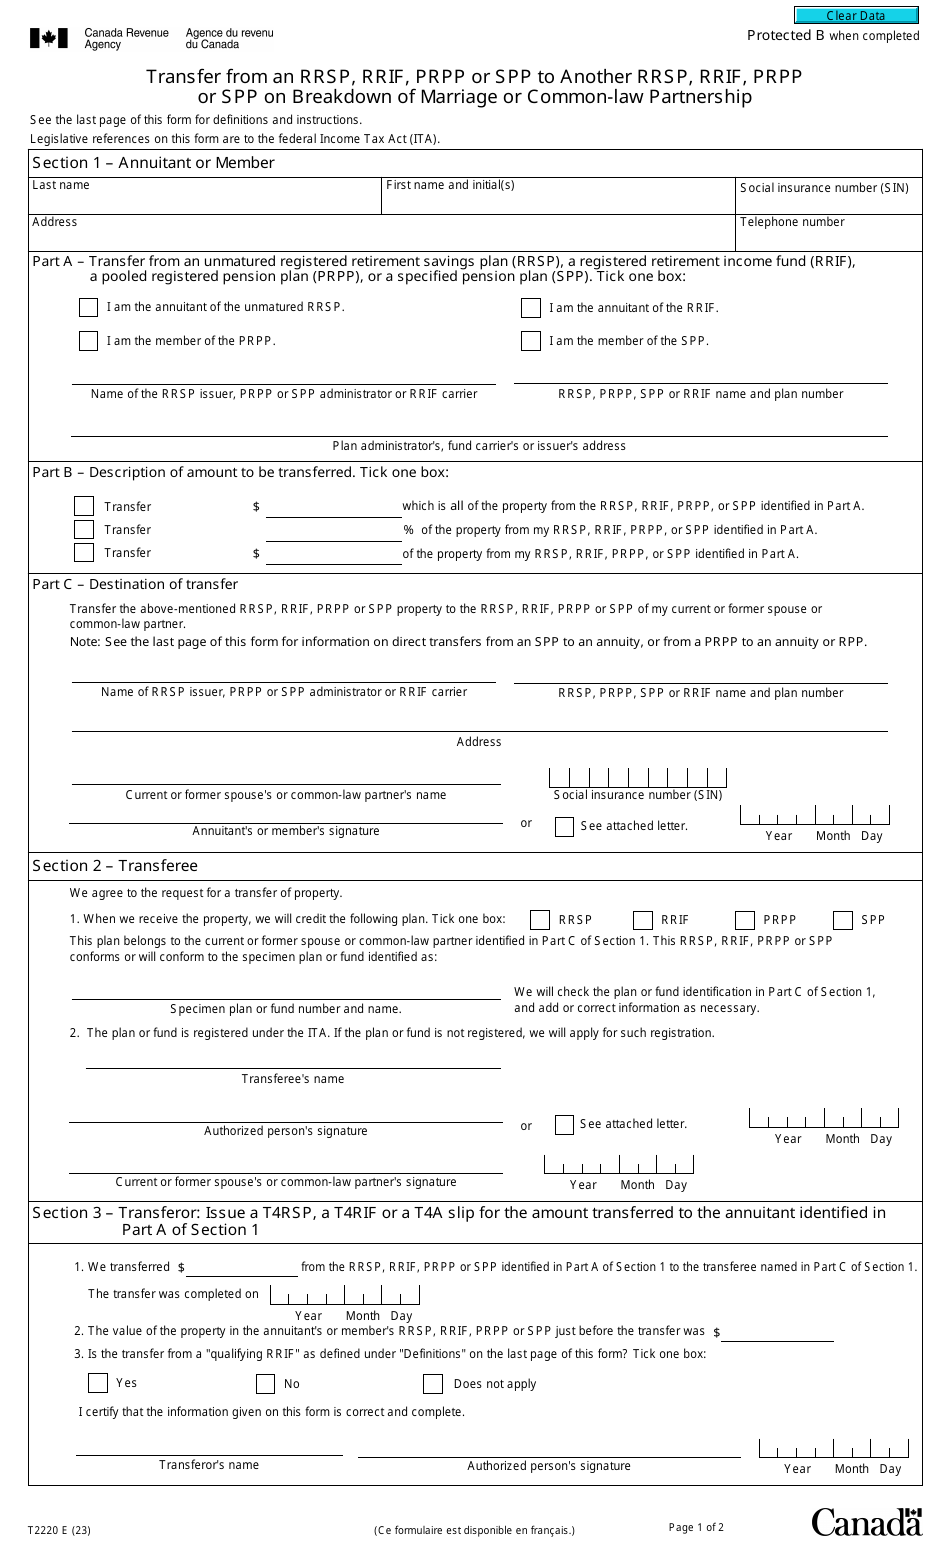 Form T2220 Transfer From an Rrsp, Rrif, Prpp or Spp to Another Rrsp, Rrif, Prpp or Spp on Breakdown of Marriage or Common-Law Partnership - Canada, Page 1